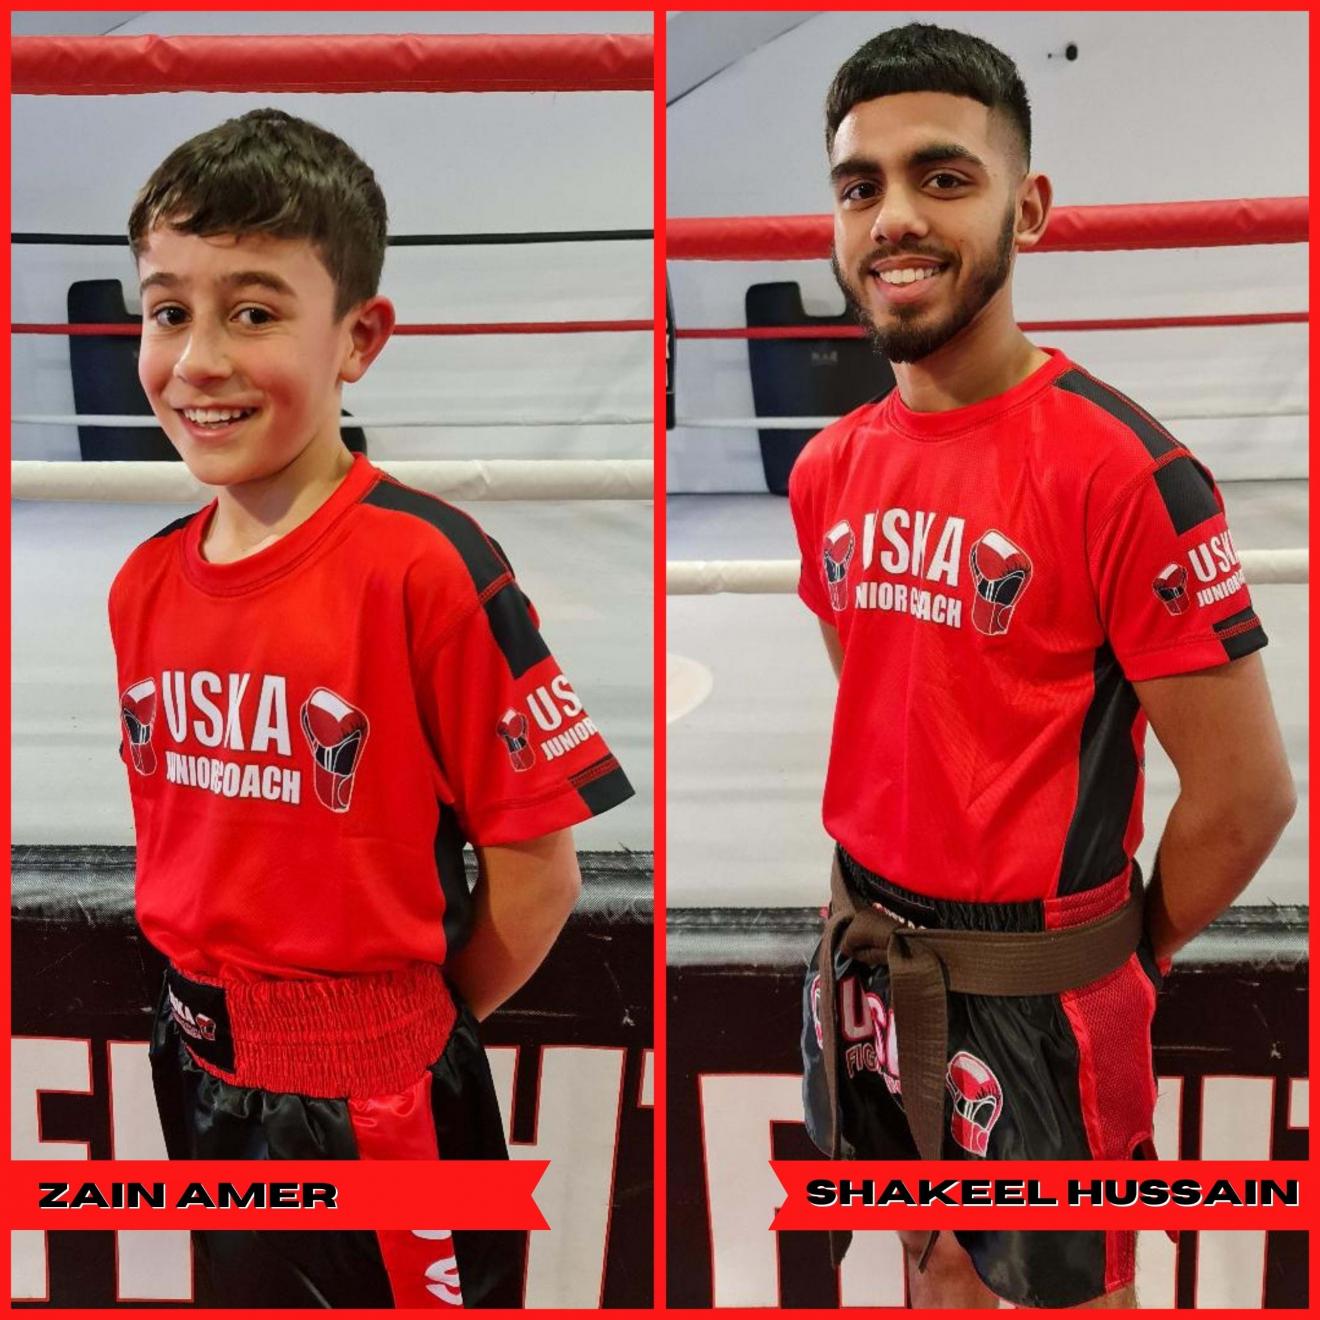 19-04-22 - Welcome our first two new Junior Coaches Zain Amer and Shakeel Hussain!